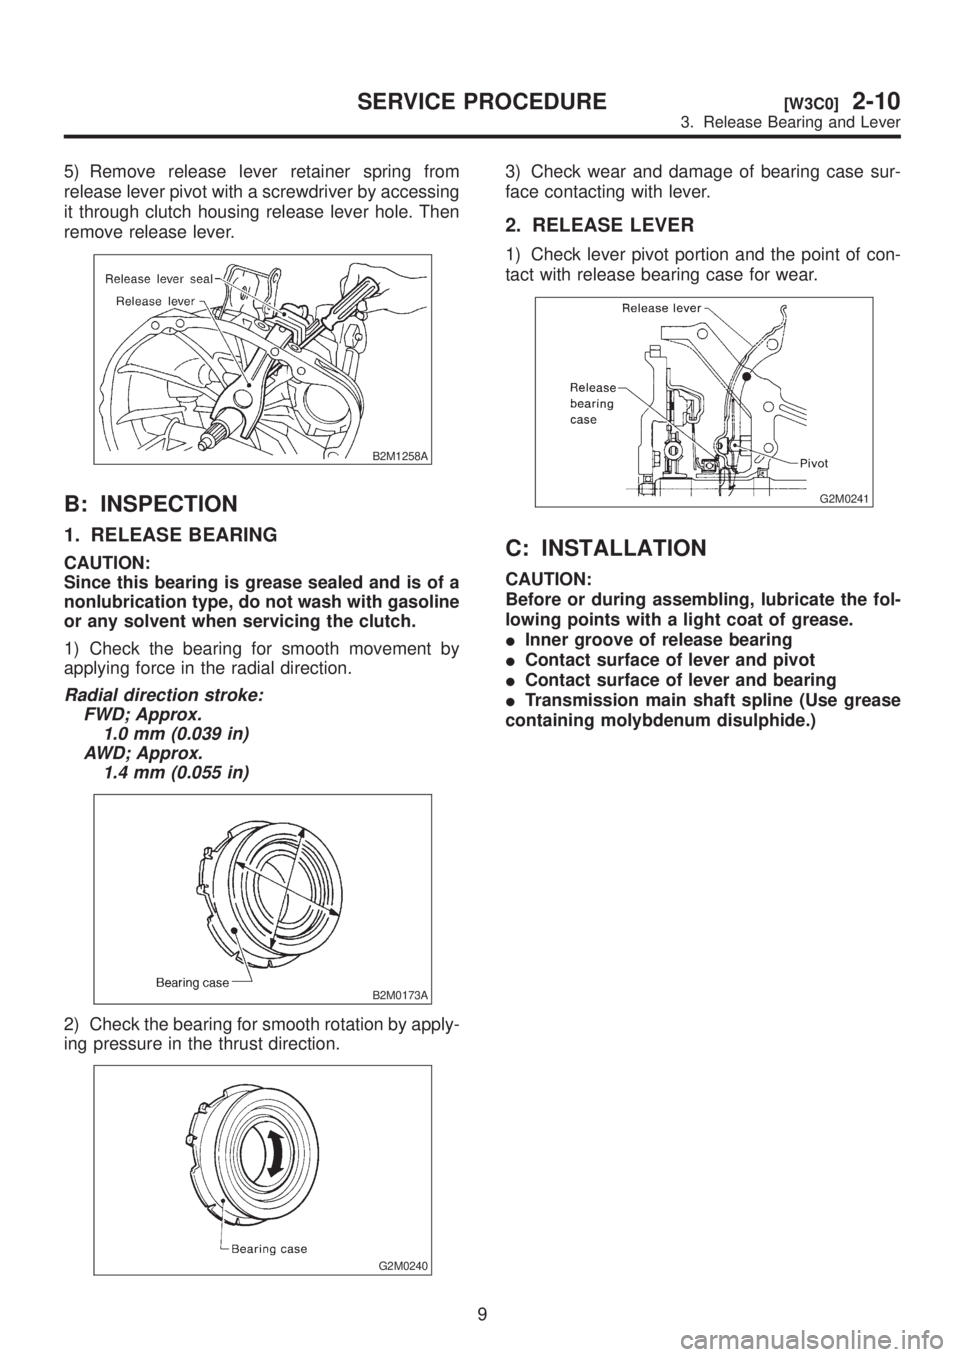 SUBARU LEGACY 1999  Service Repair Manual 5) Remove release lever retainer spring from
release lever pivot with a screwdriver by accessing
it through clutch housing release lever hole. Then
remove release lever.
B2M1258A
B: INSPECTION
1. RELE